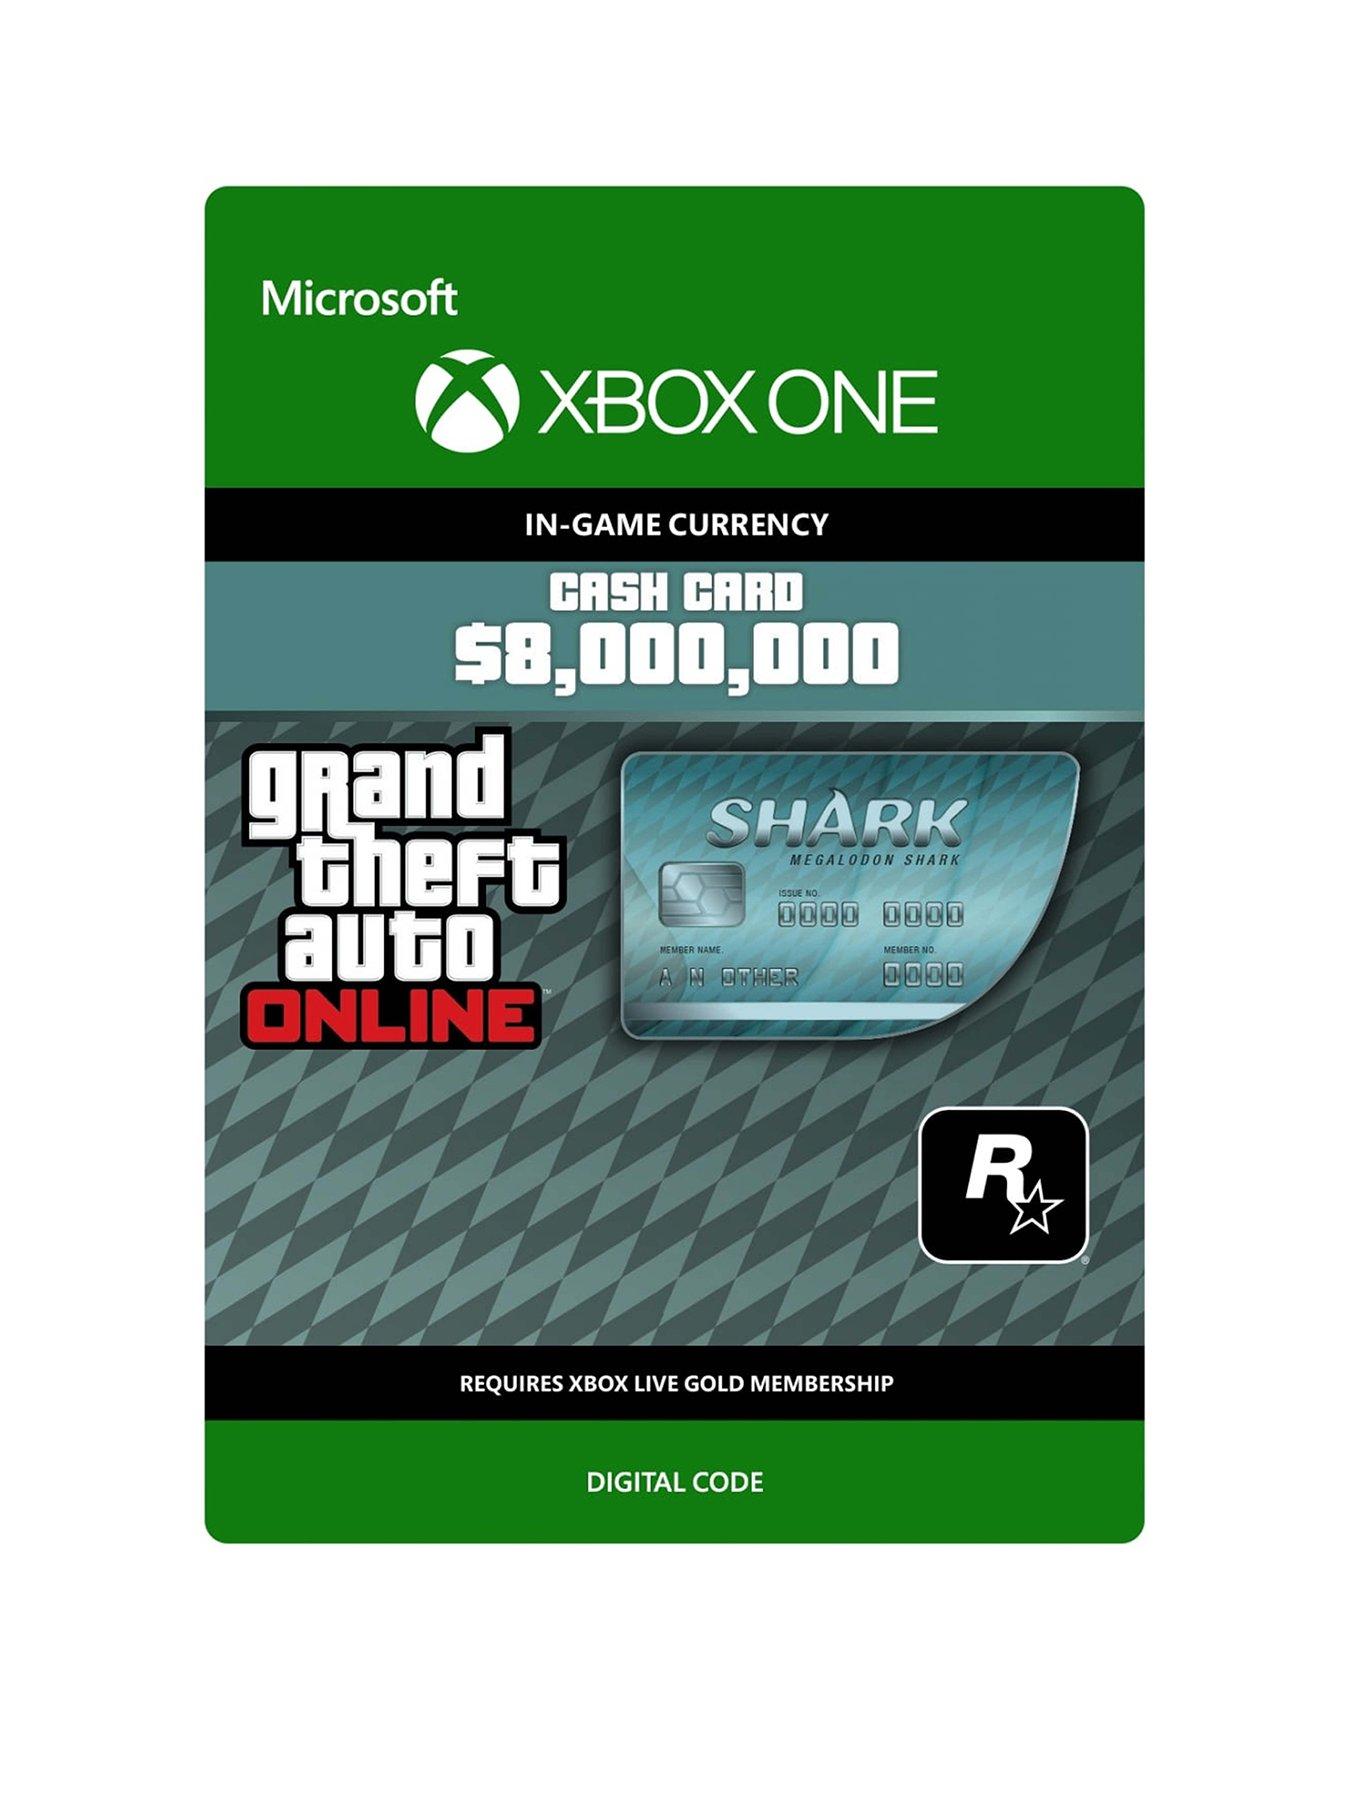 Xbox One Digital Games Gaming Dvd Www Littlewoods Com - 4500 robux for xbox one digital code